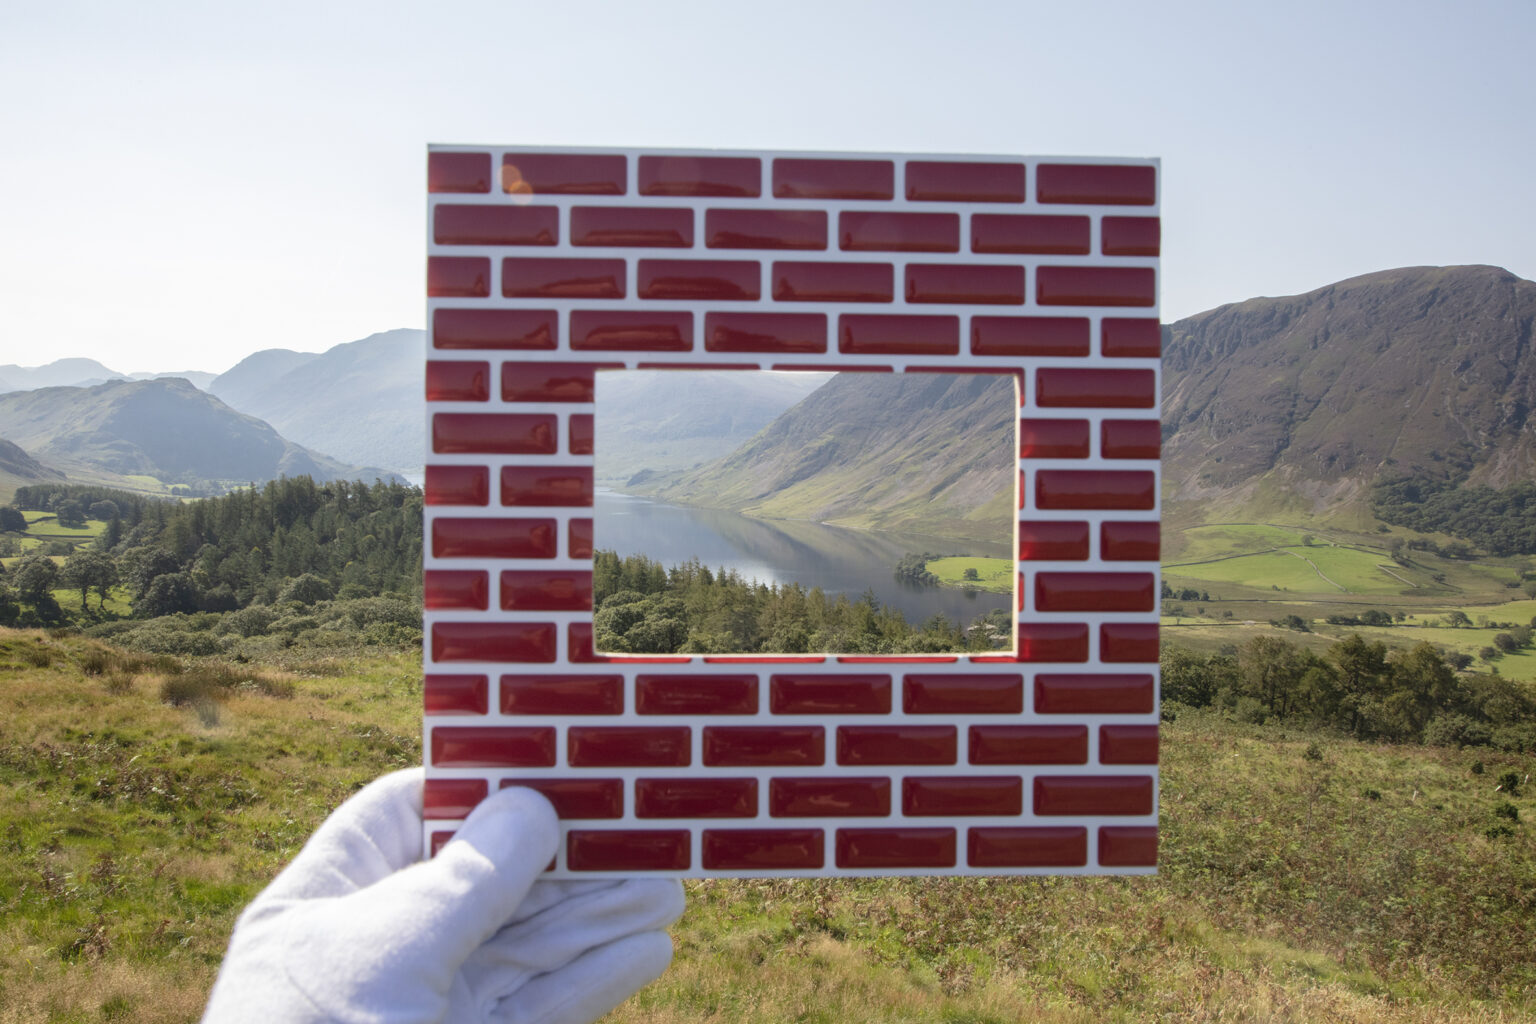 A white gloved hand holds a viewfinder, made to resemble a brick wall, up against a majestic landscape.